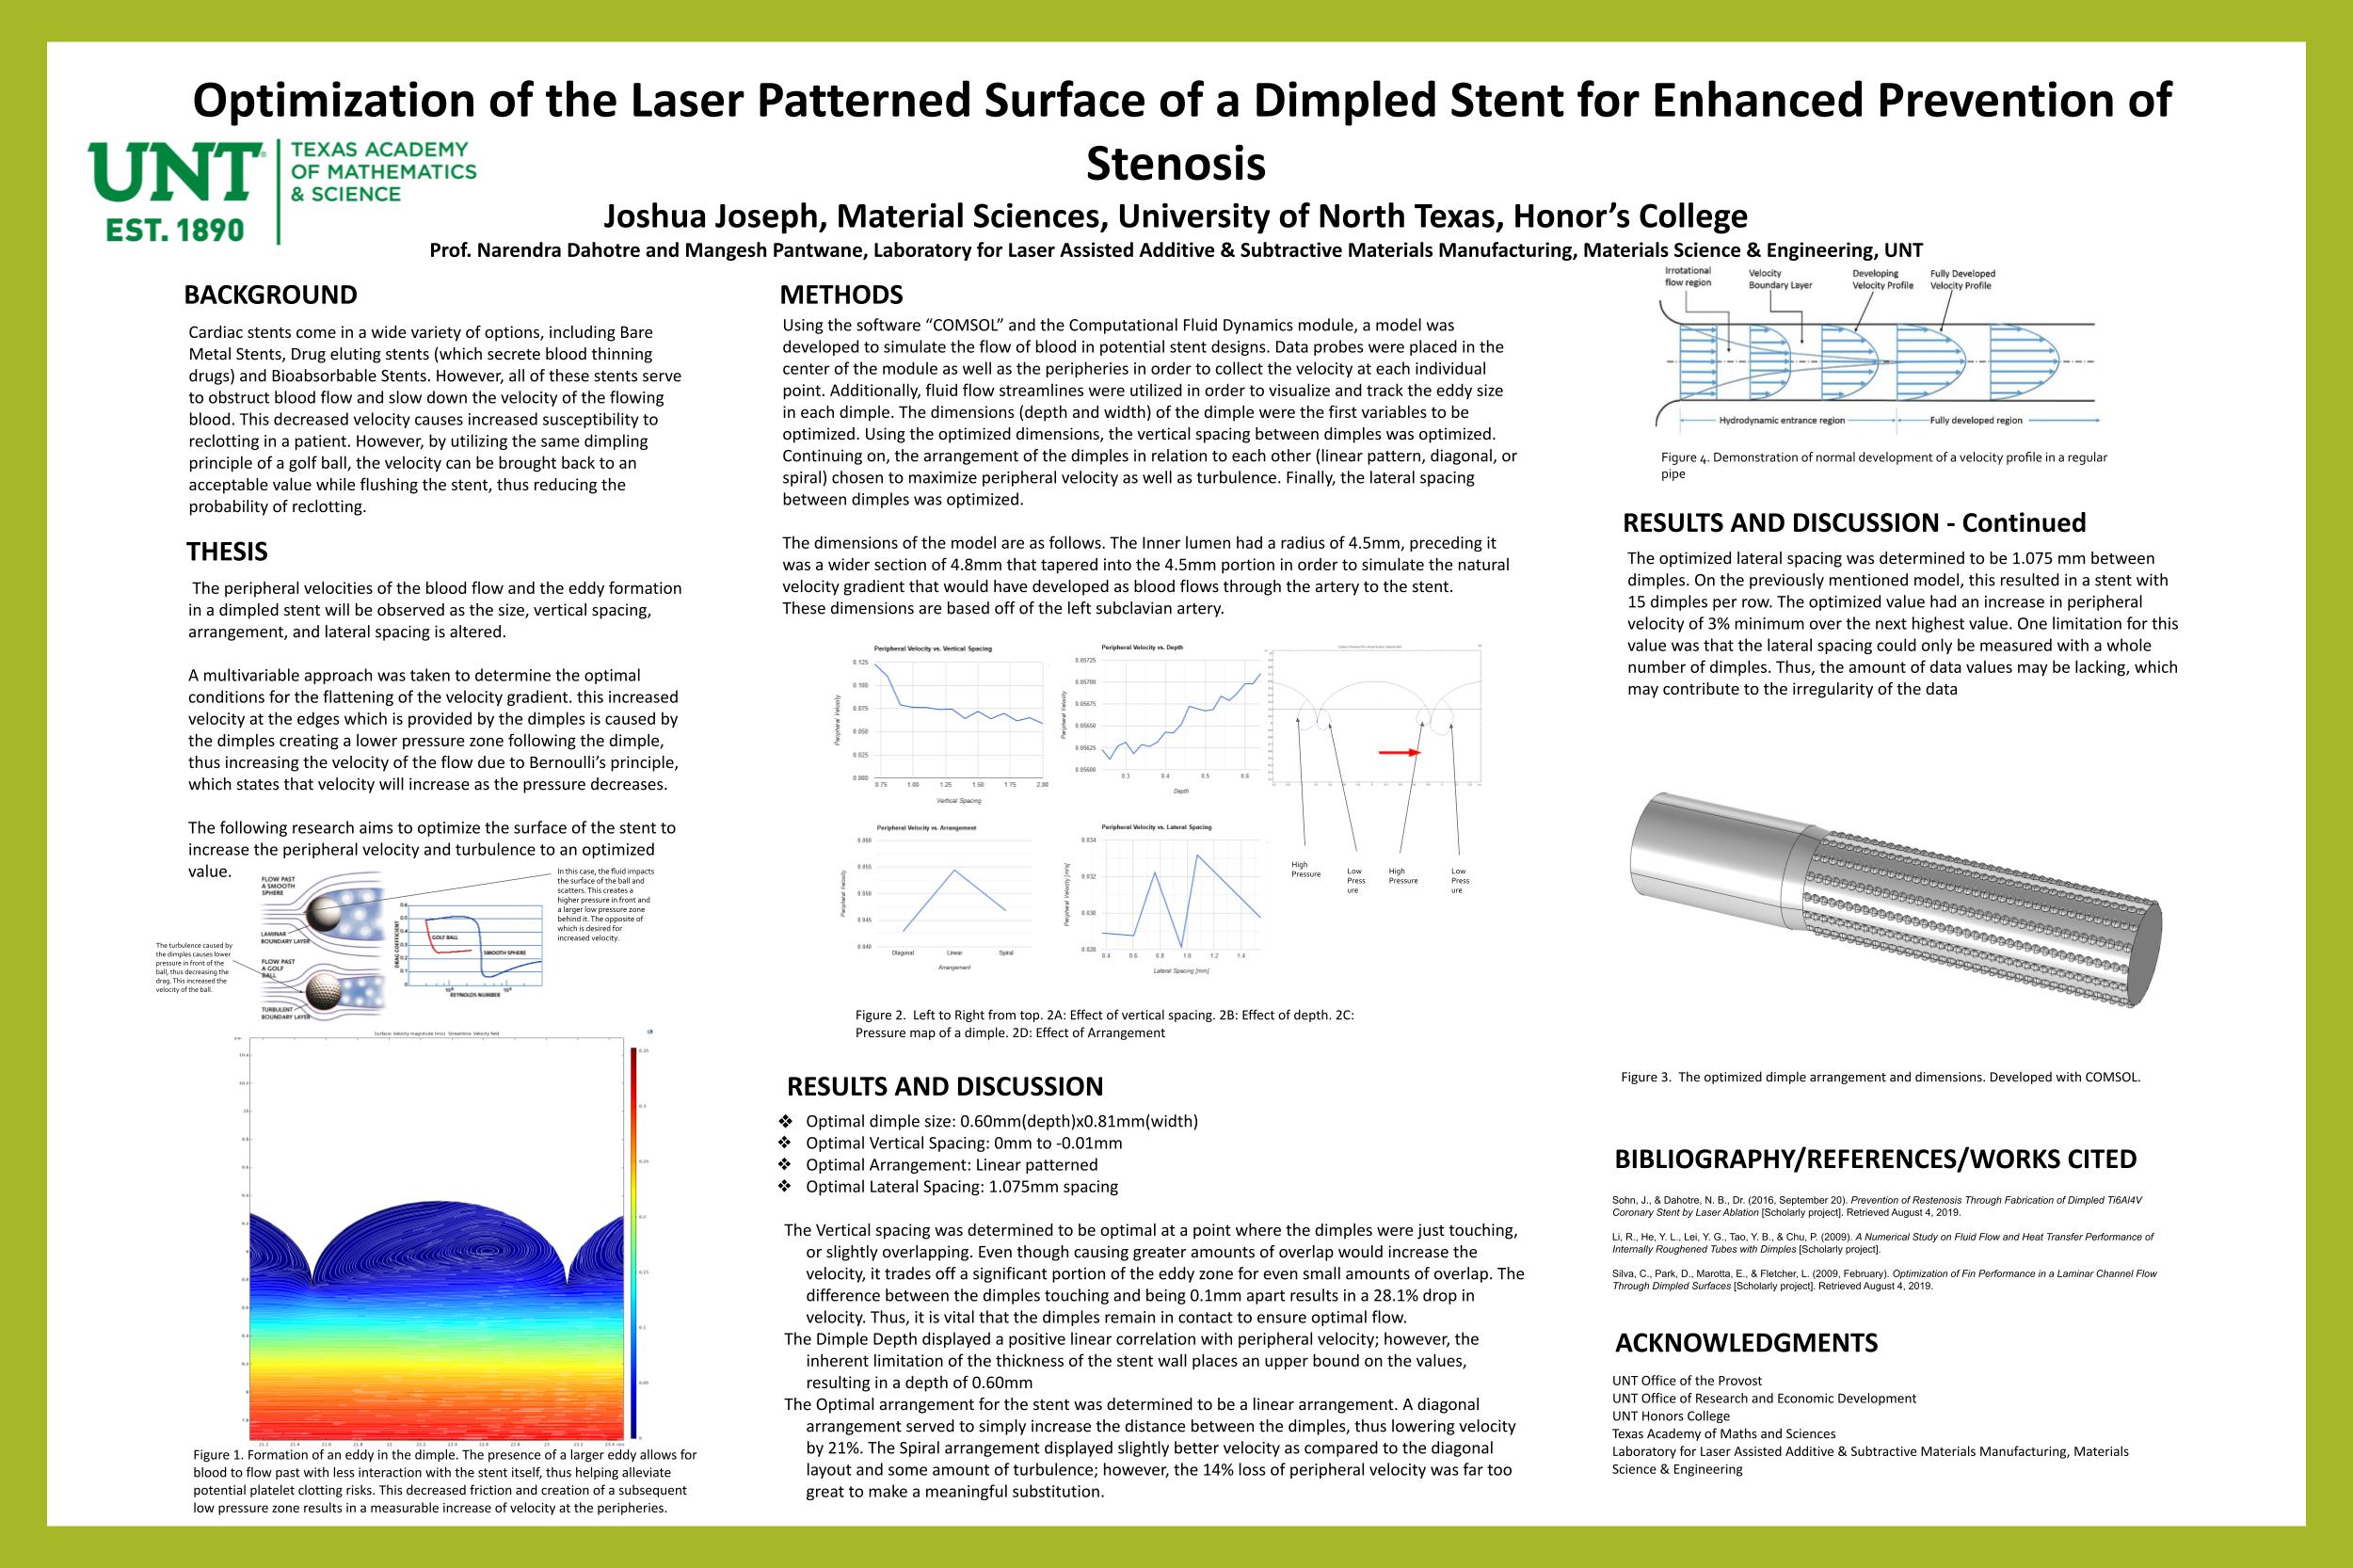 Optimization of the Laser Patterned Surface of a Dimpled Stent for Enhanced Prevention of Stenosis